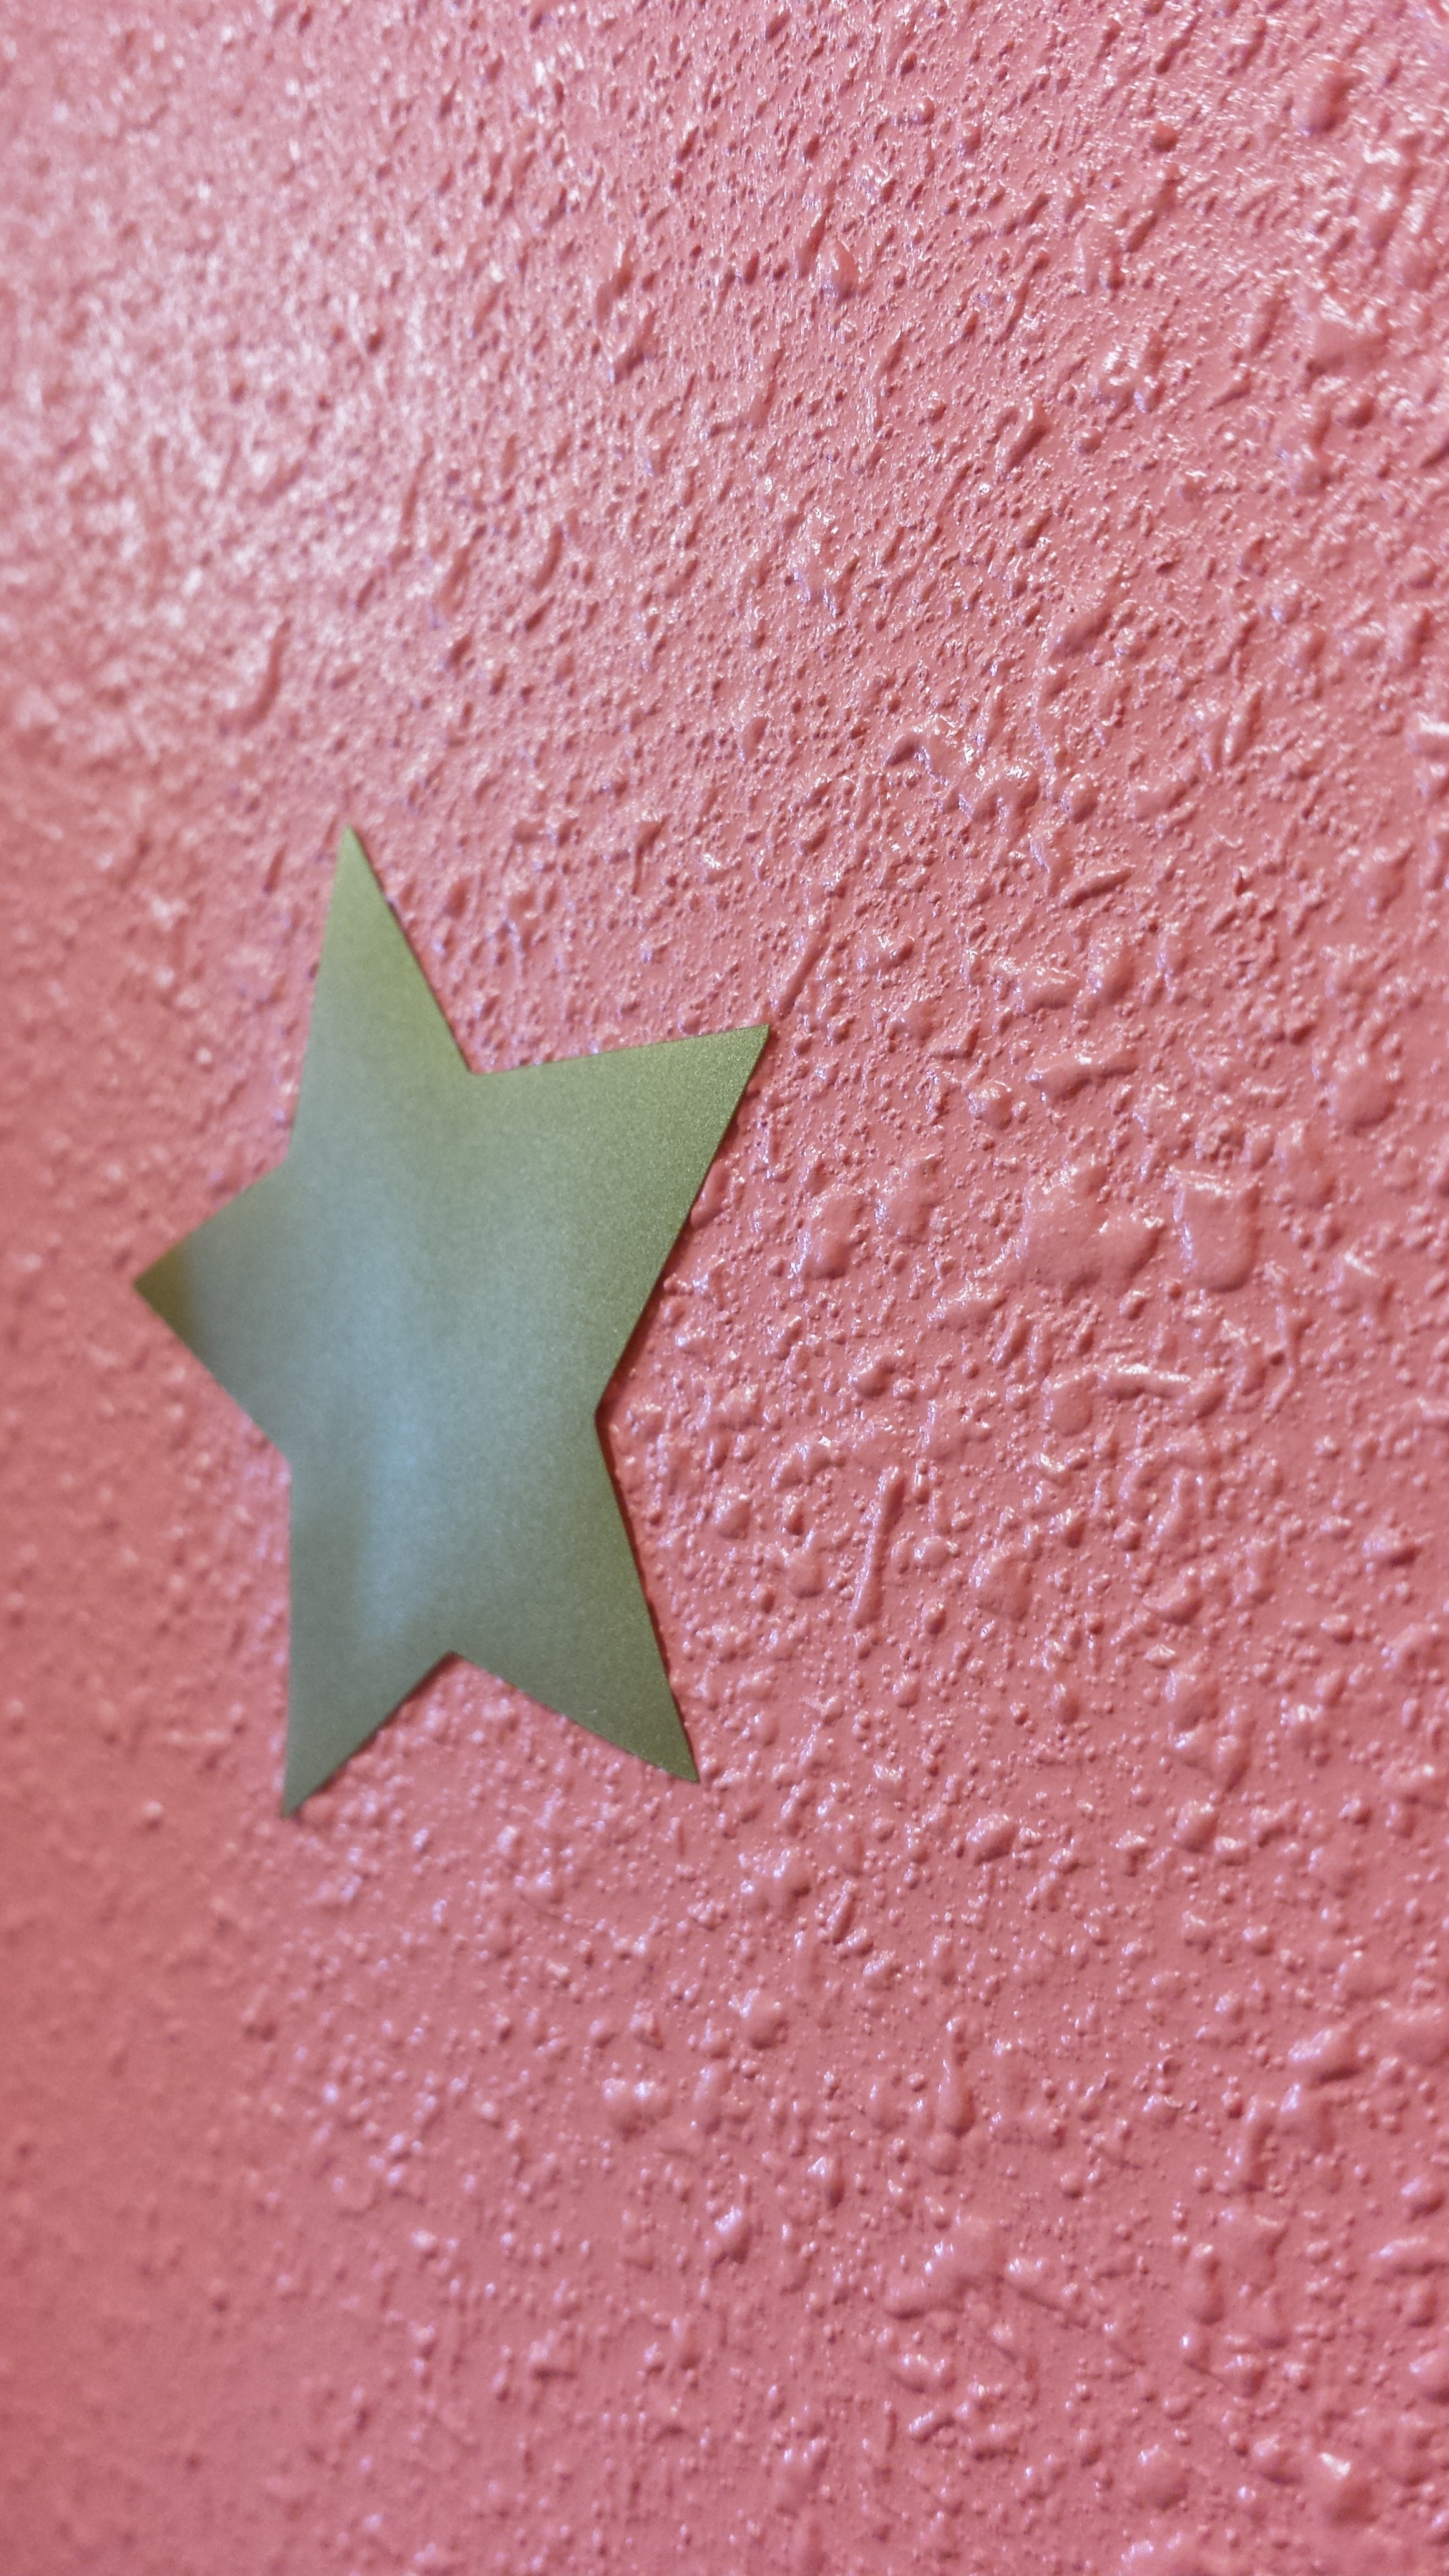 Gold Star Wall Sticker on a rough textured wall